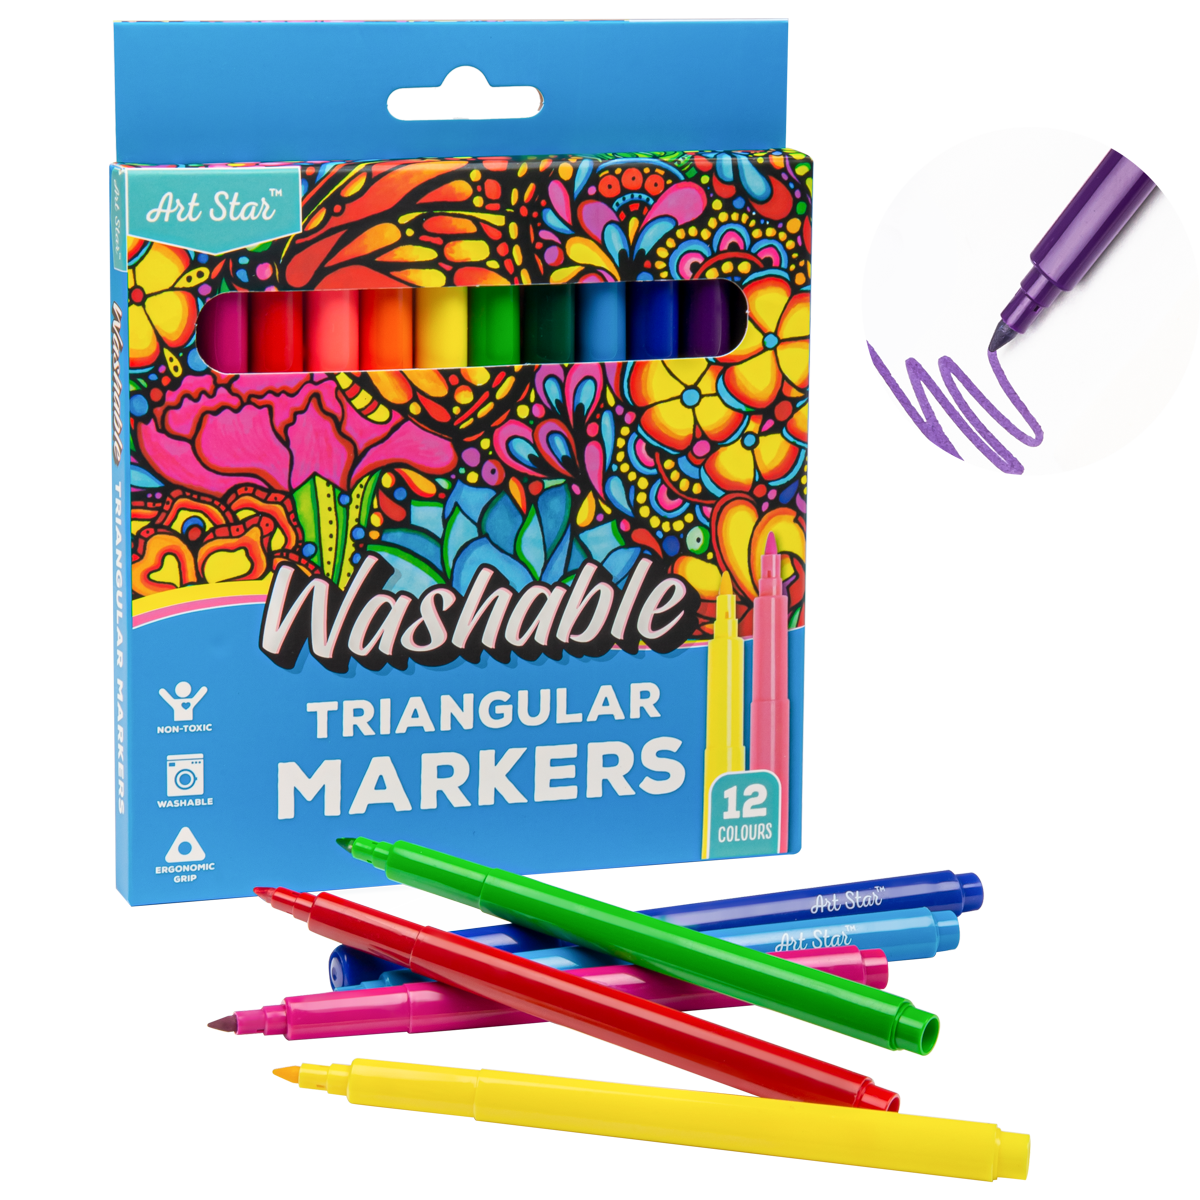 Image of Art Star Washable Triangular Markers (12 Pack)